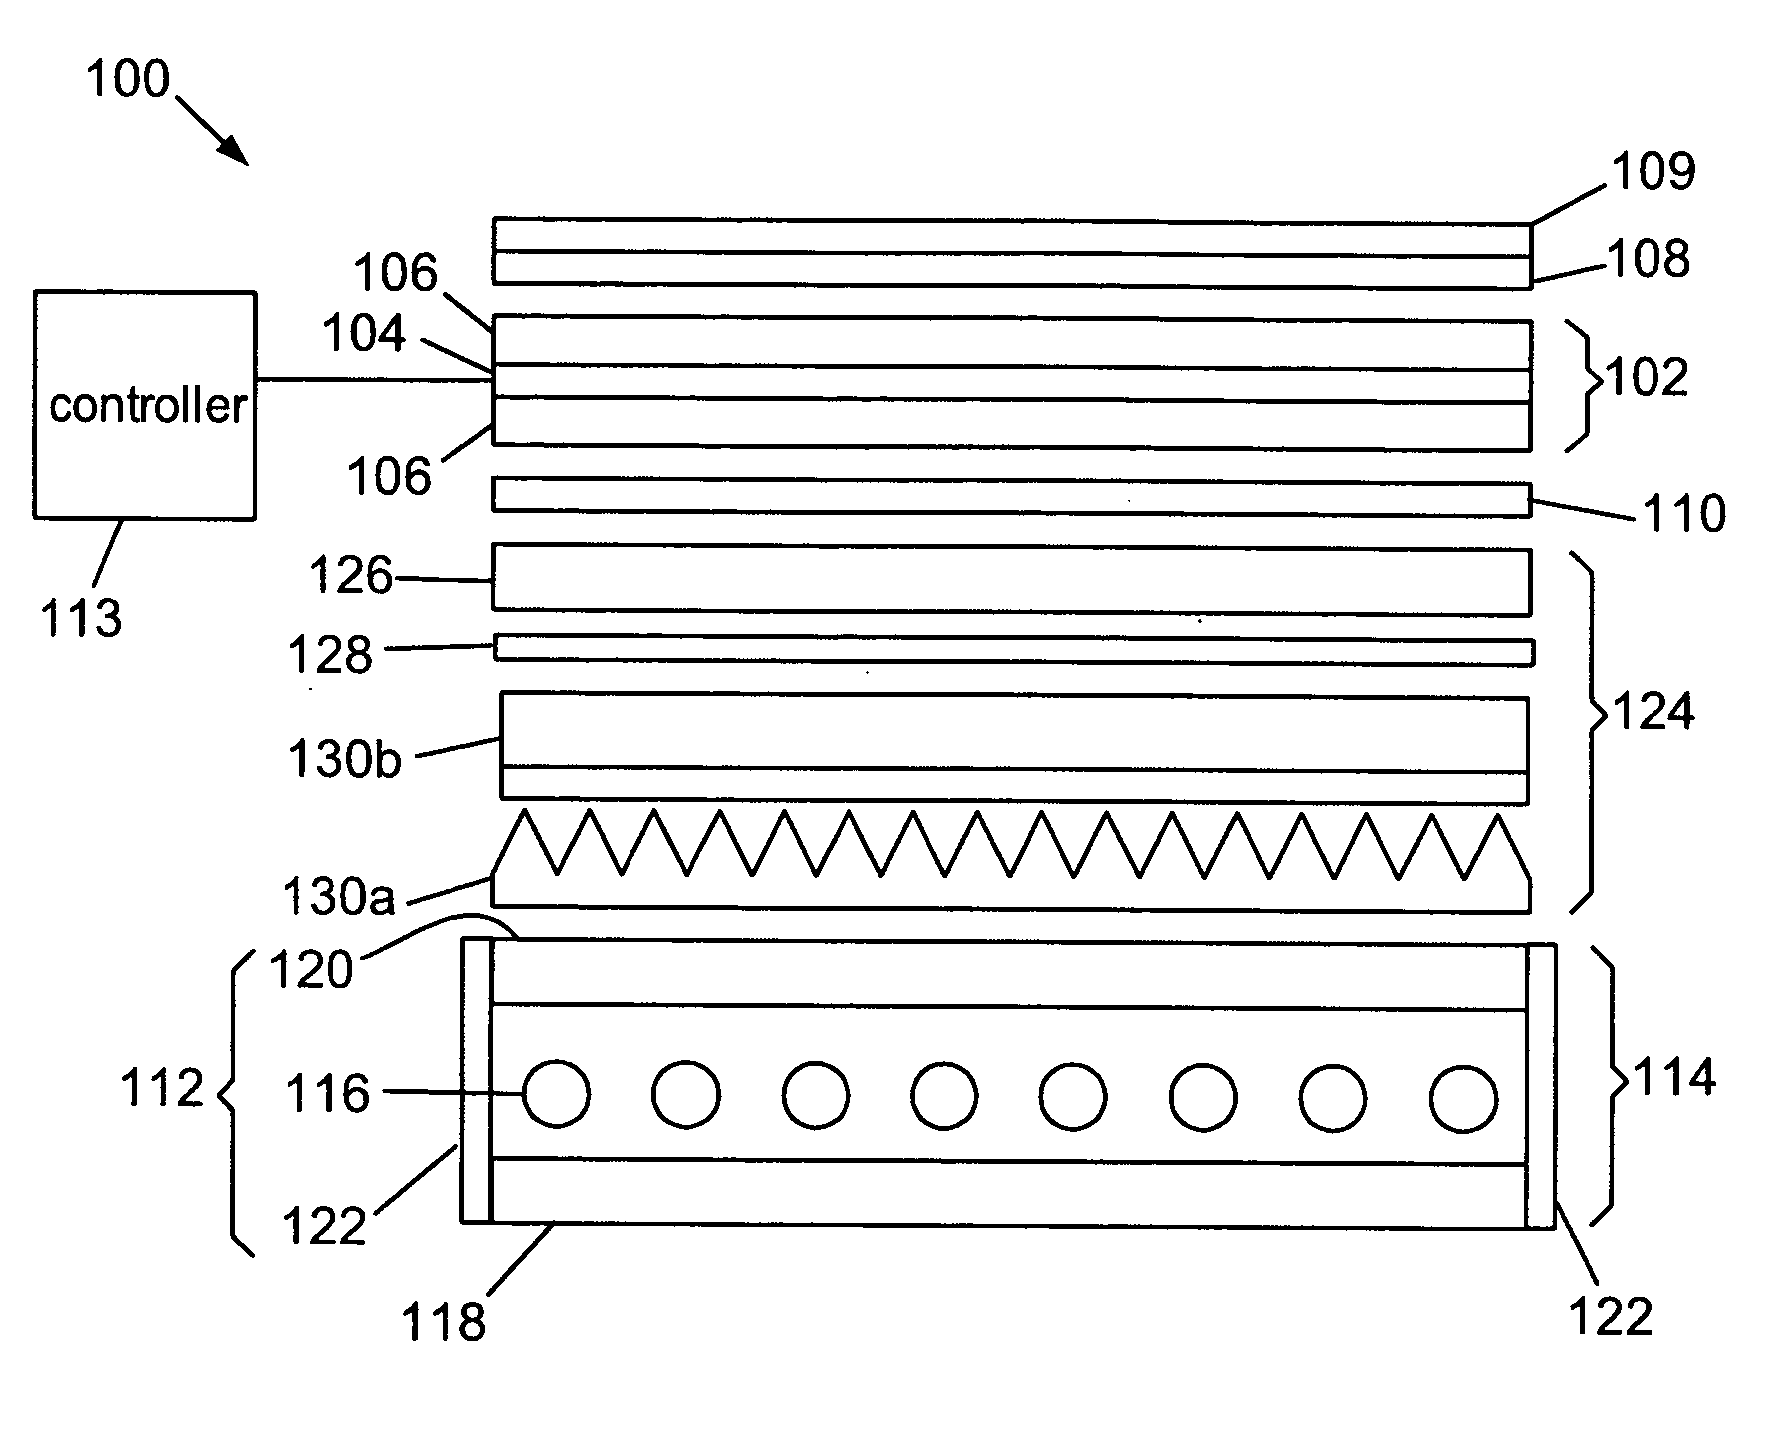 Optical element for lateral light spreading in back-lit displays and system using same